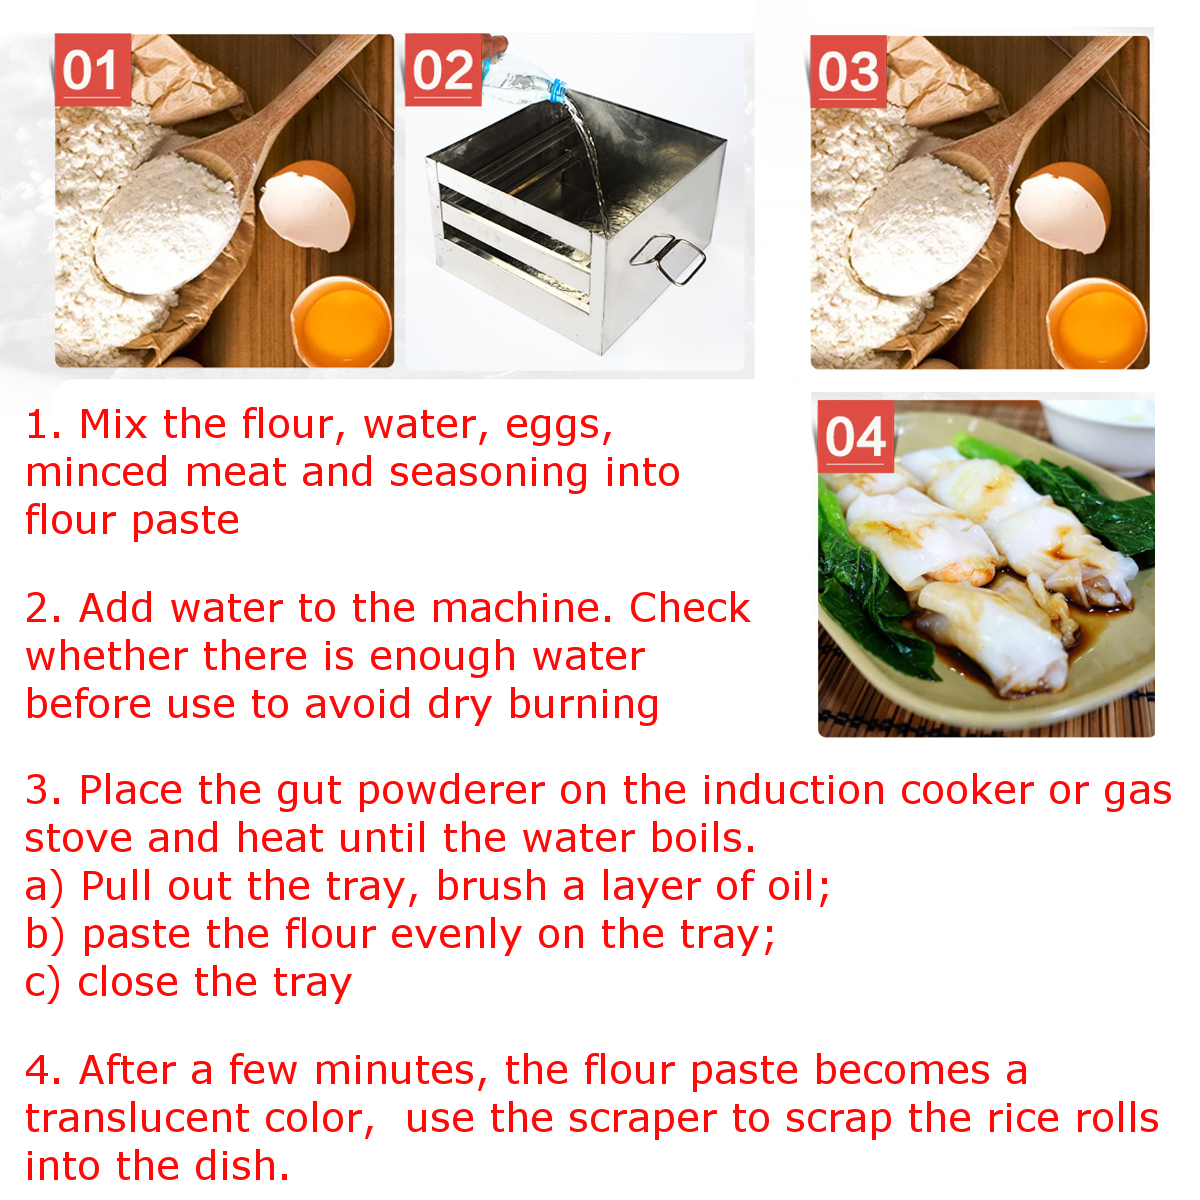 Stainless-Steel-Tray-2-Layer-Steamed-Vermicelli-Rice-Roll-Machine-Kitchen-Cooking-Steamer-Drawer-1339662